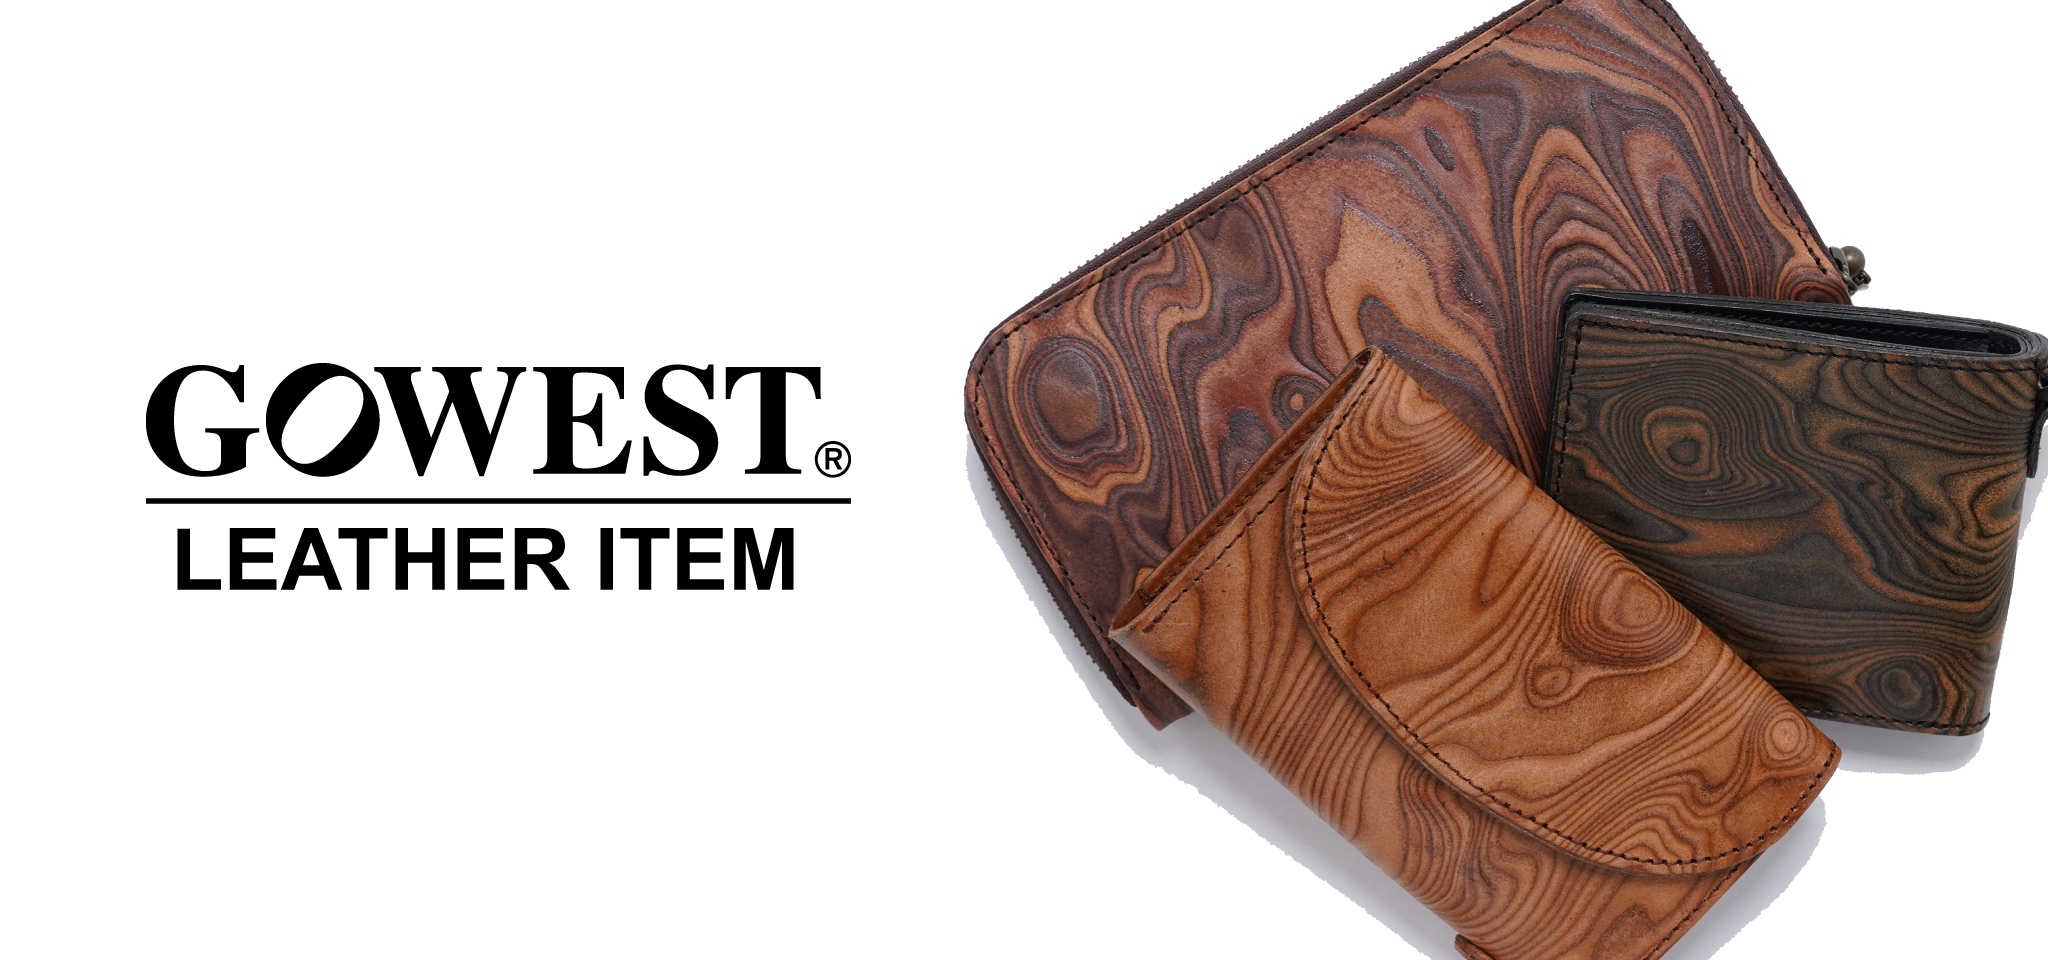 GOWEST LEATHER ITEM